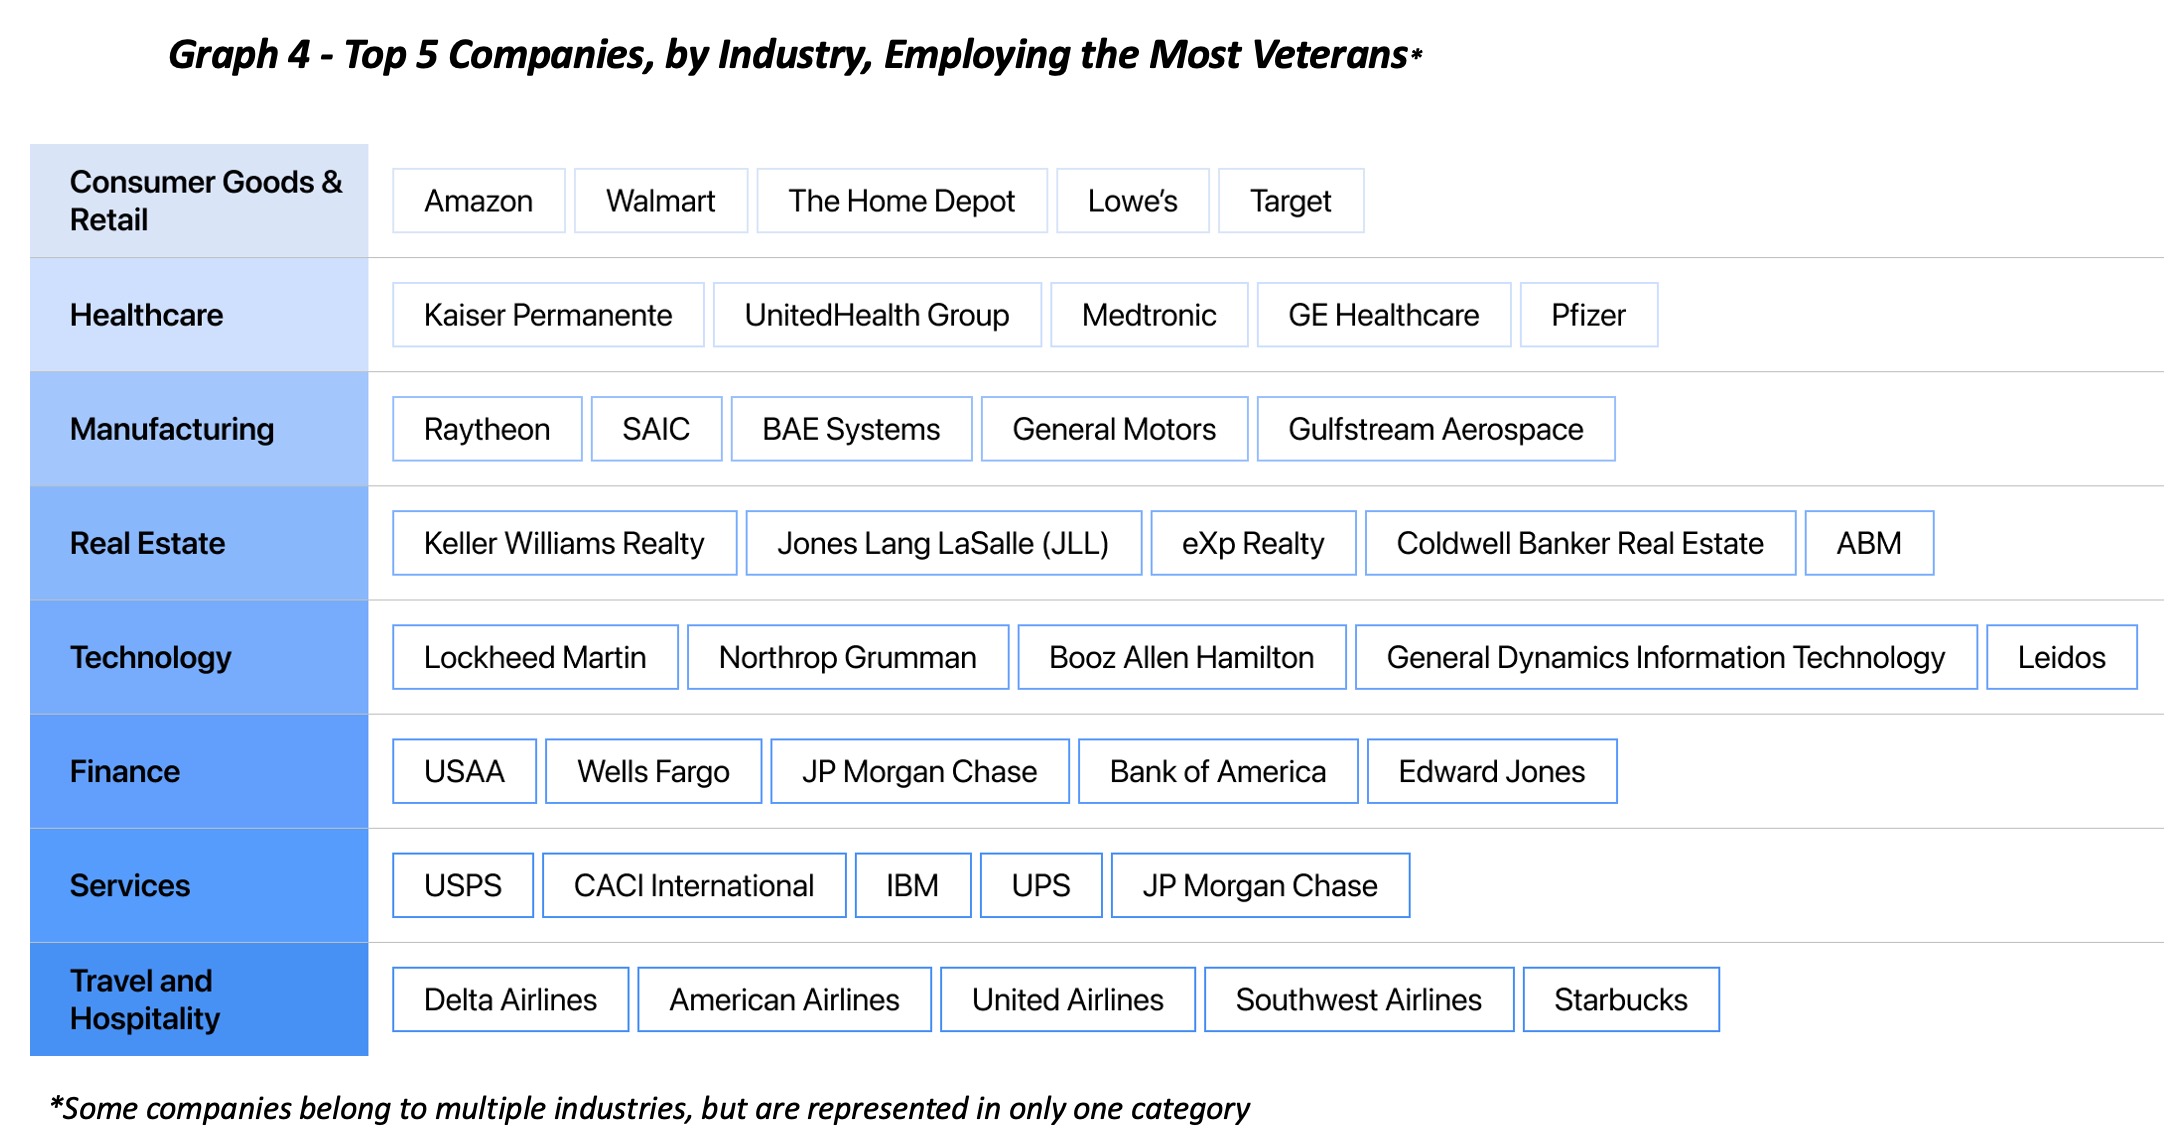 Graph 4 - Top 5 Companies, by Industry, Employing the Most Veterans